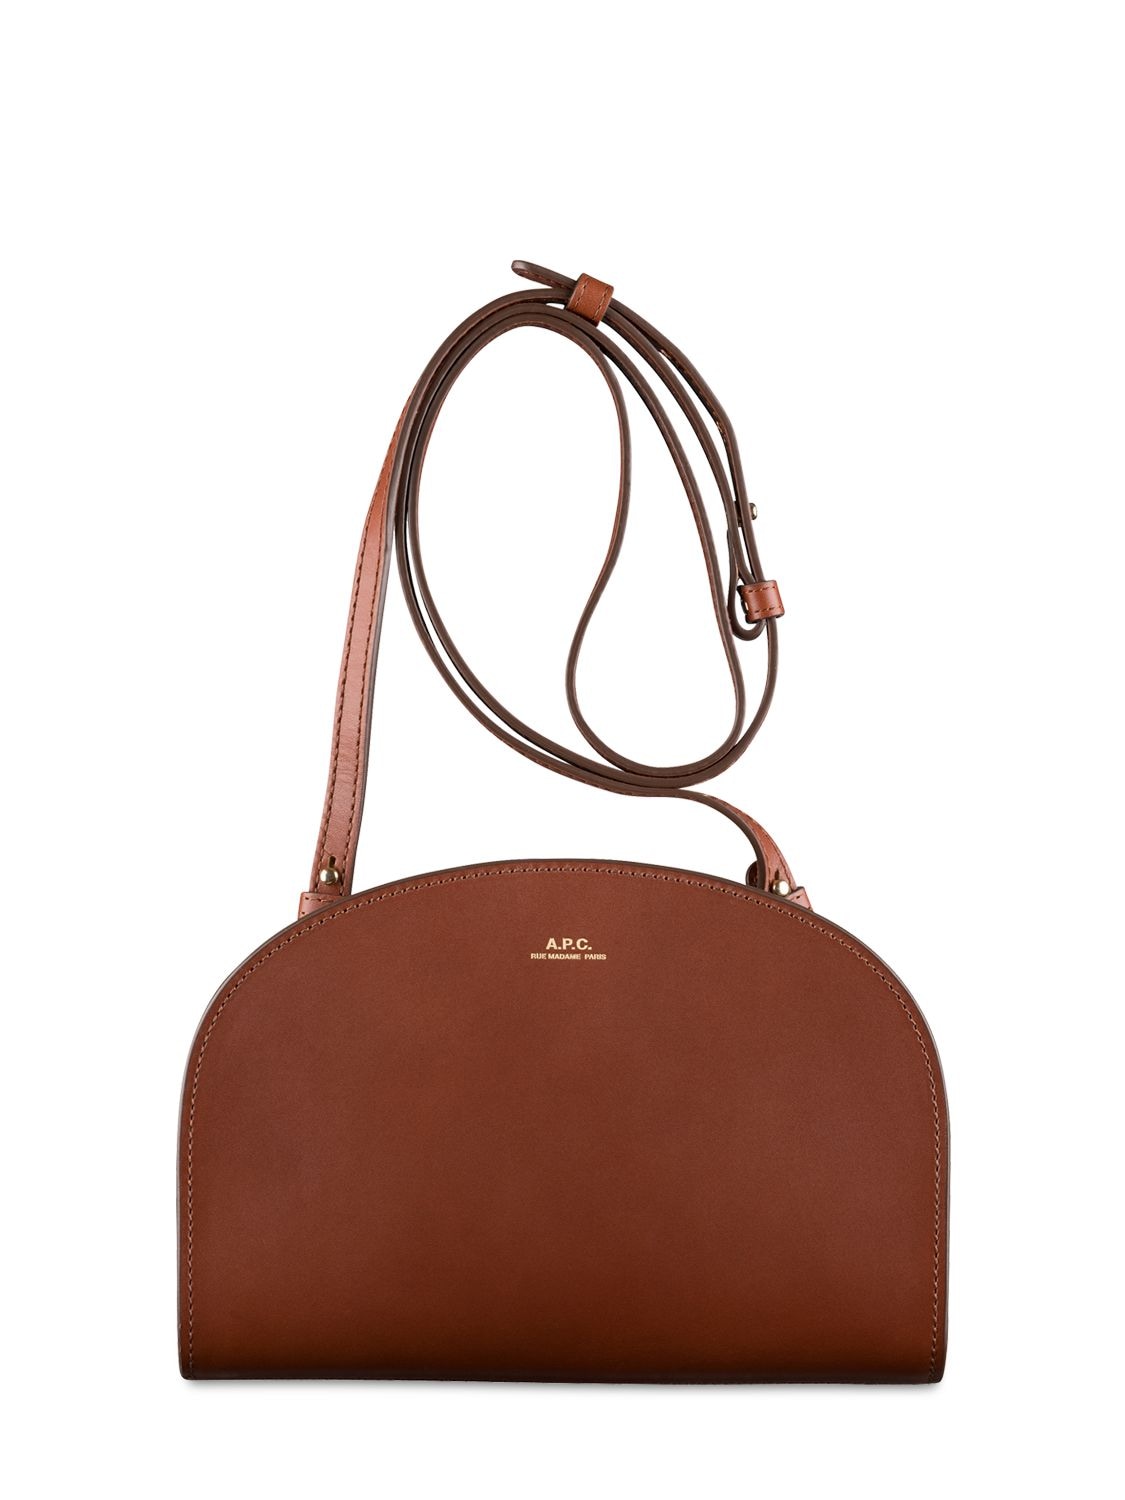 Apc Demi Lune Clutch Leather Shoulder Bag In Haselnuss